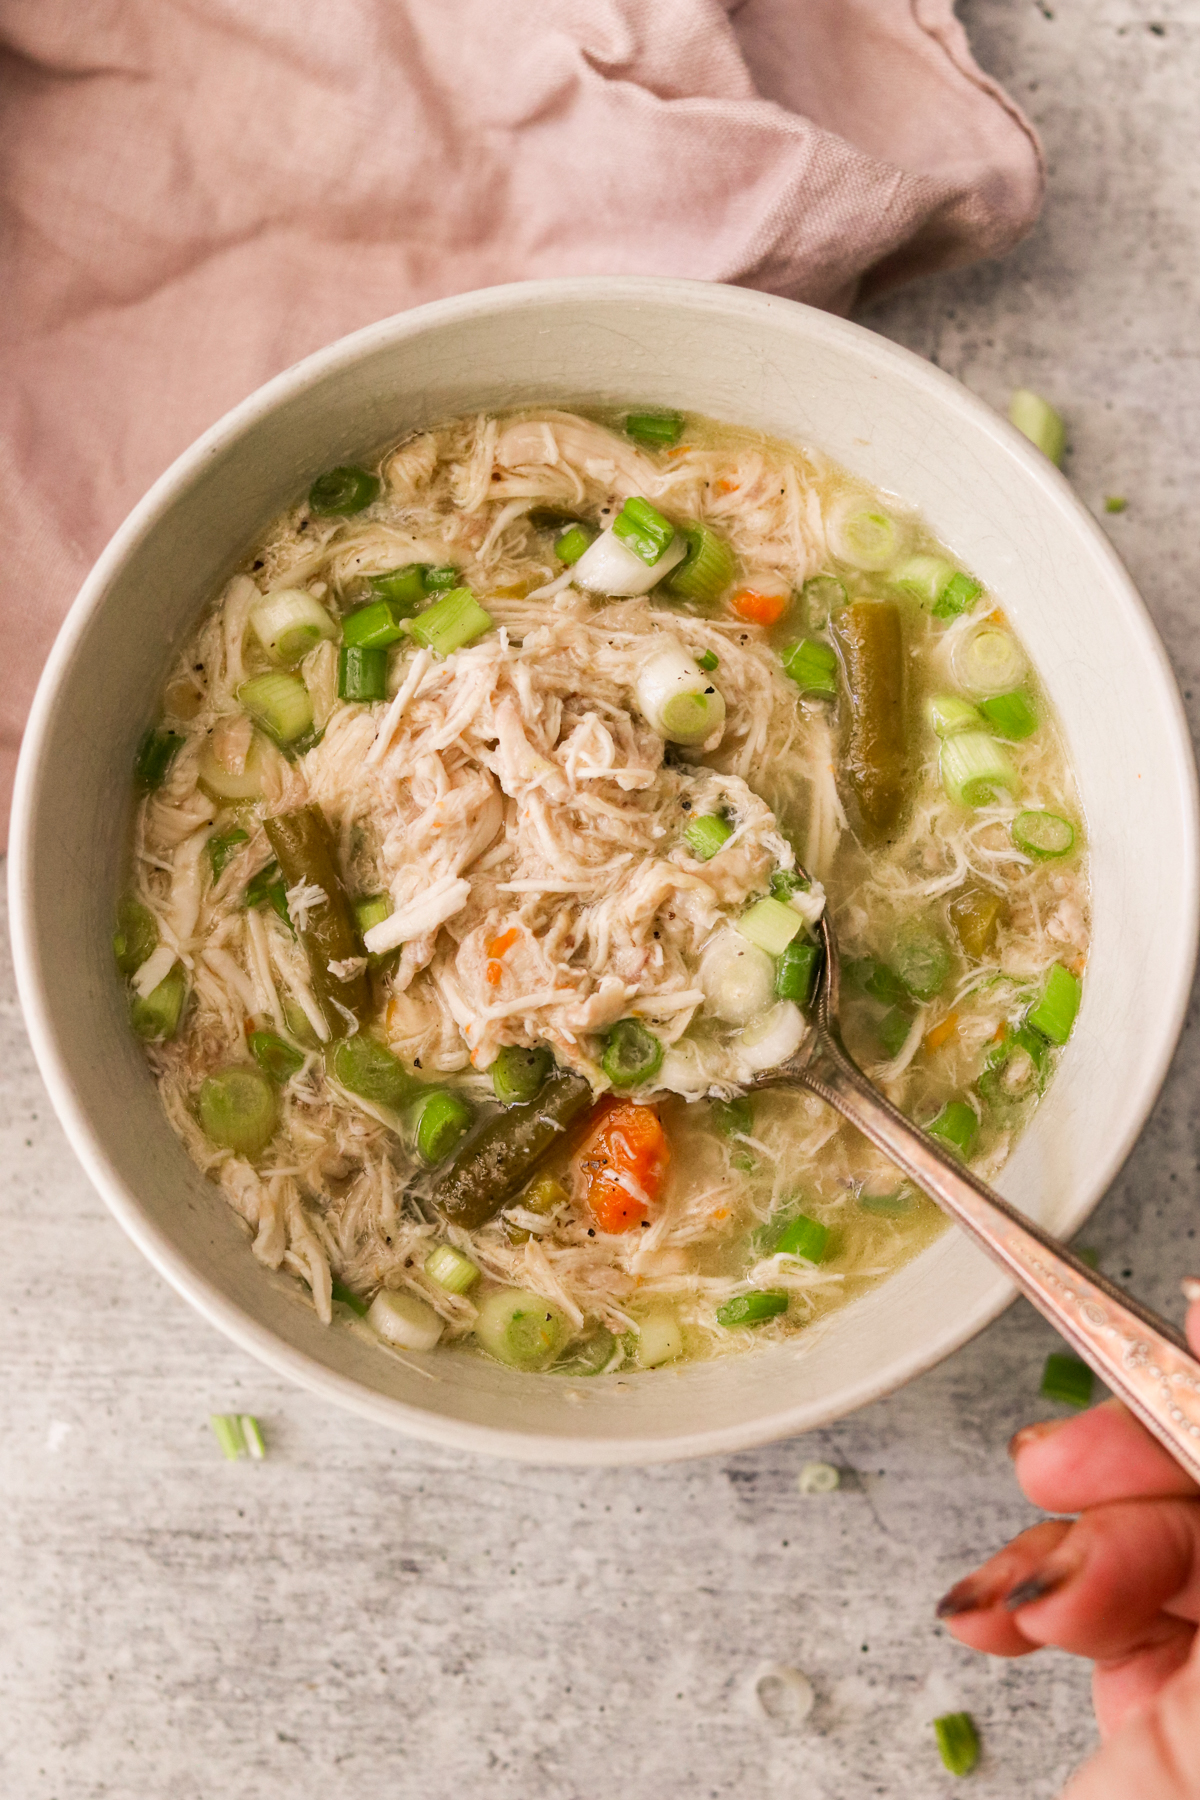 a hand dipping a spoon into a bowl of soup filled with shredded chicken and veggies